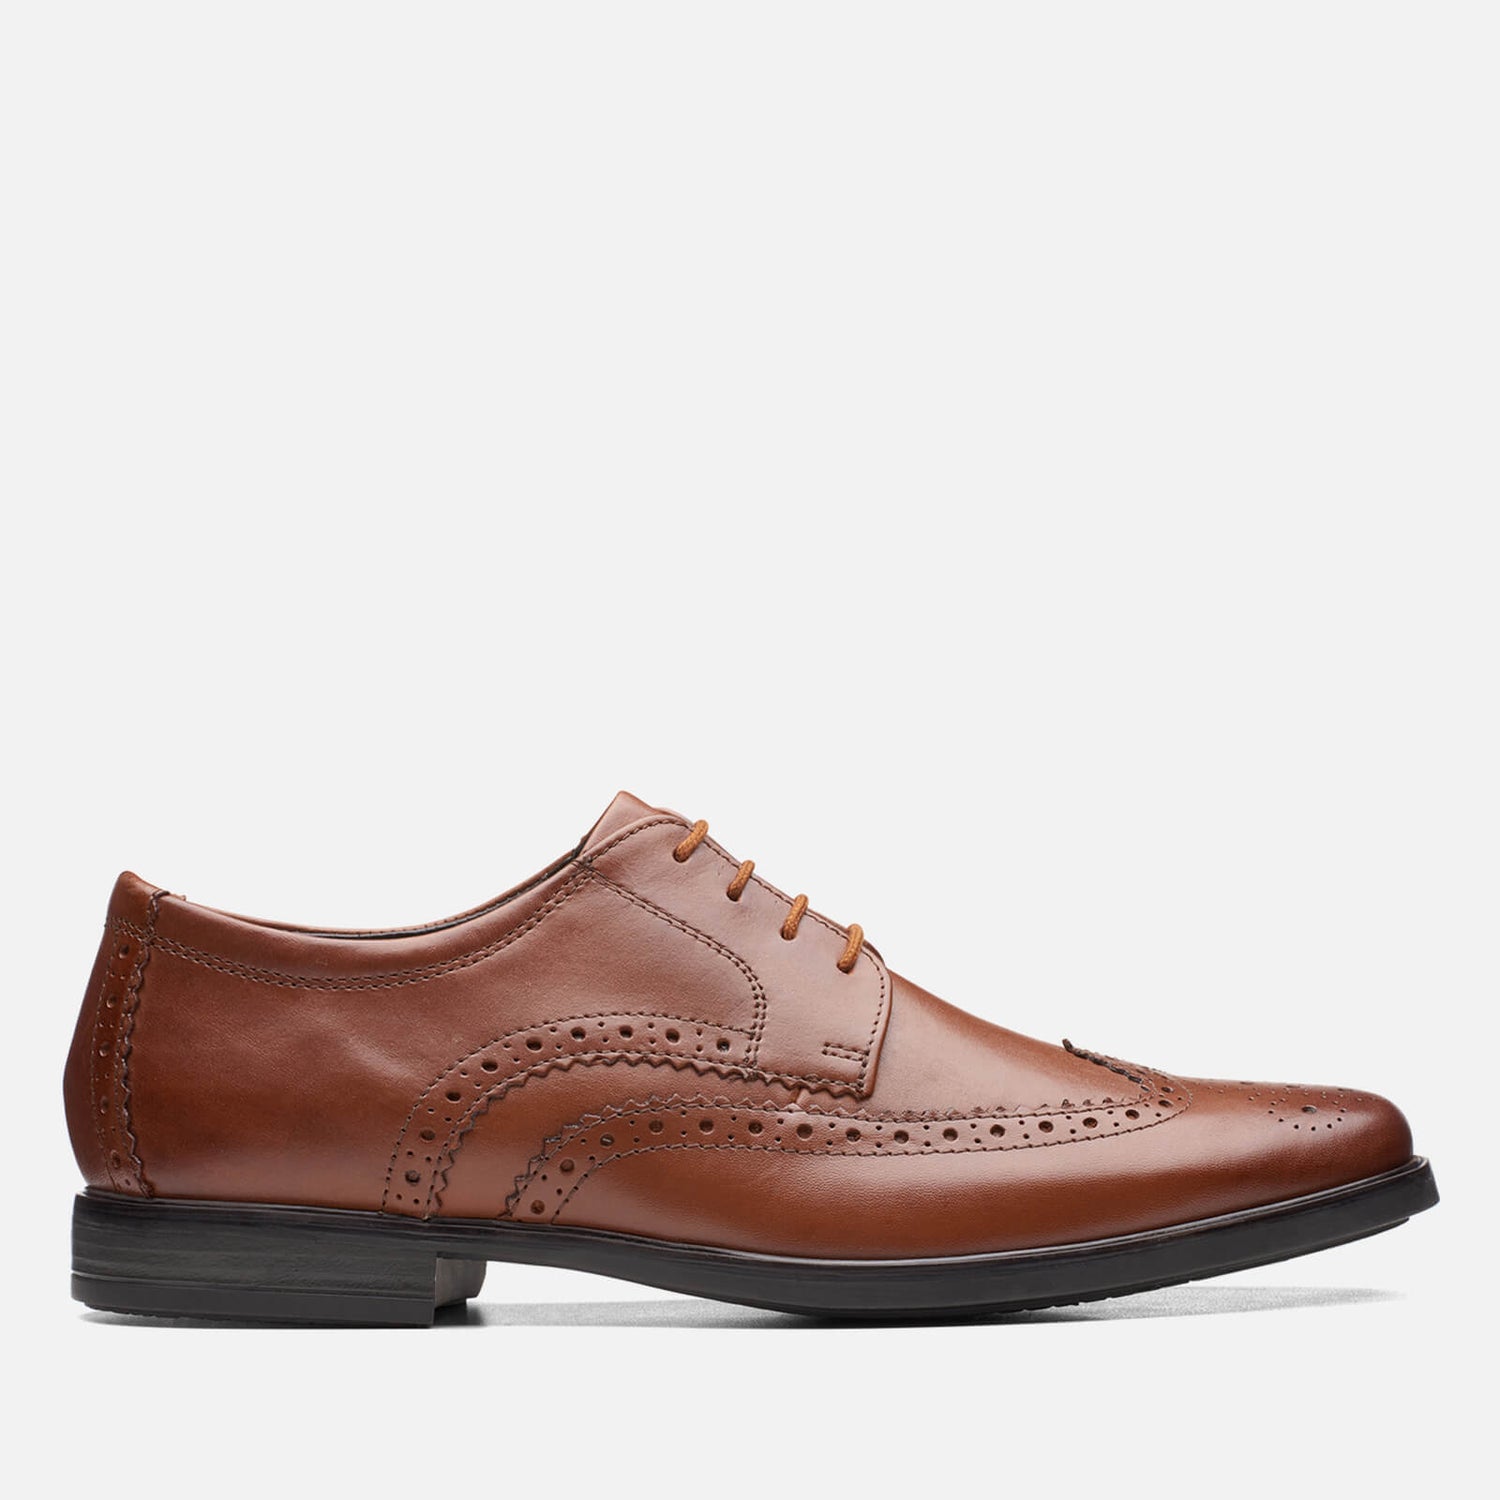 Clarks Howard Wing Leather Derby Shoes - UK 7